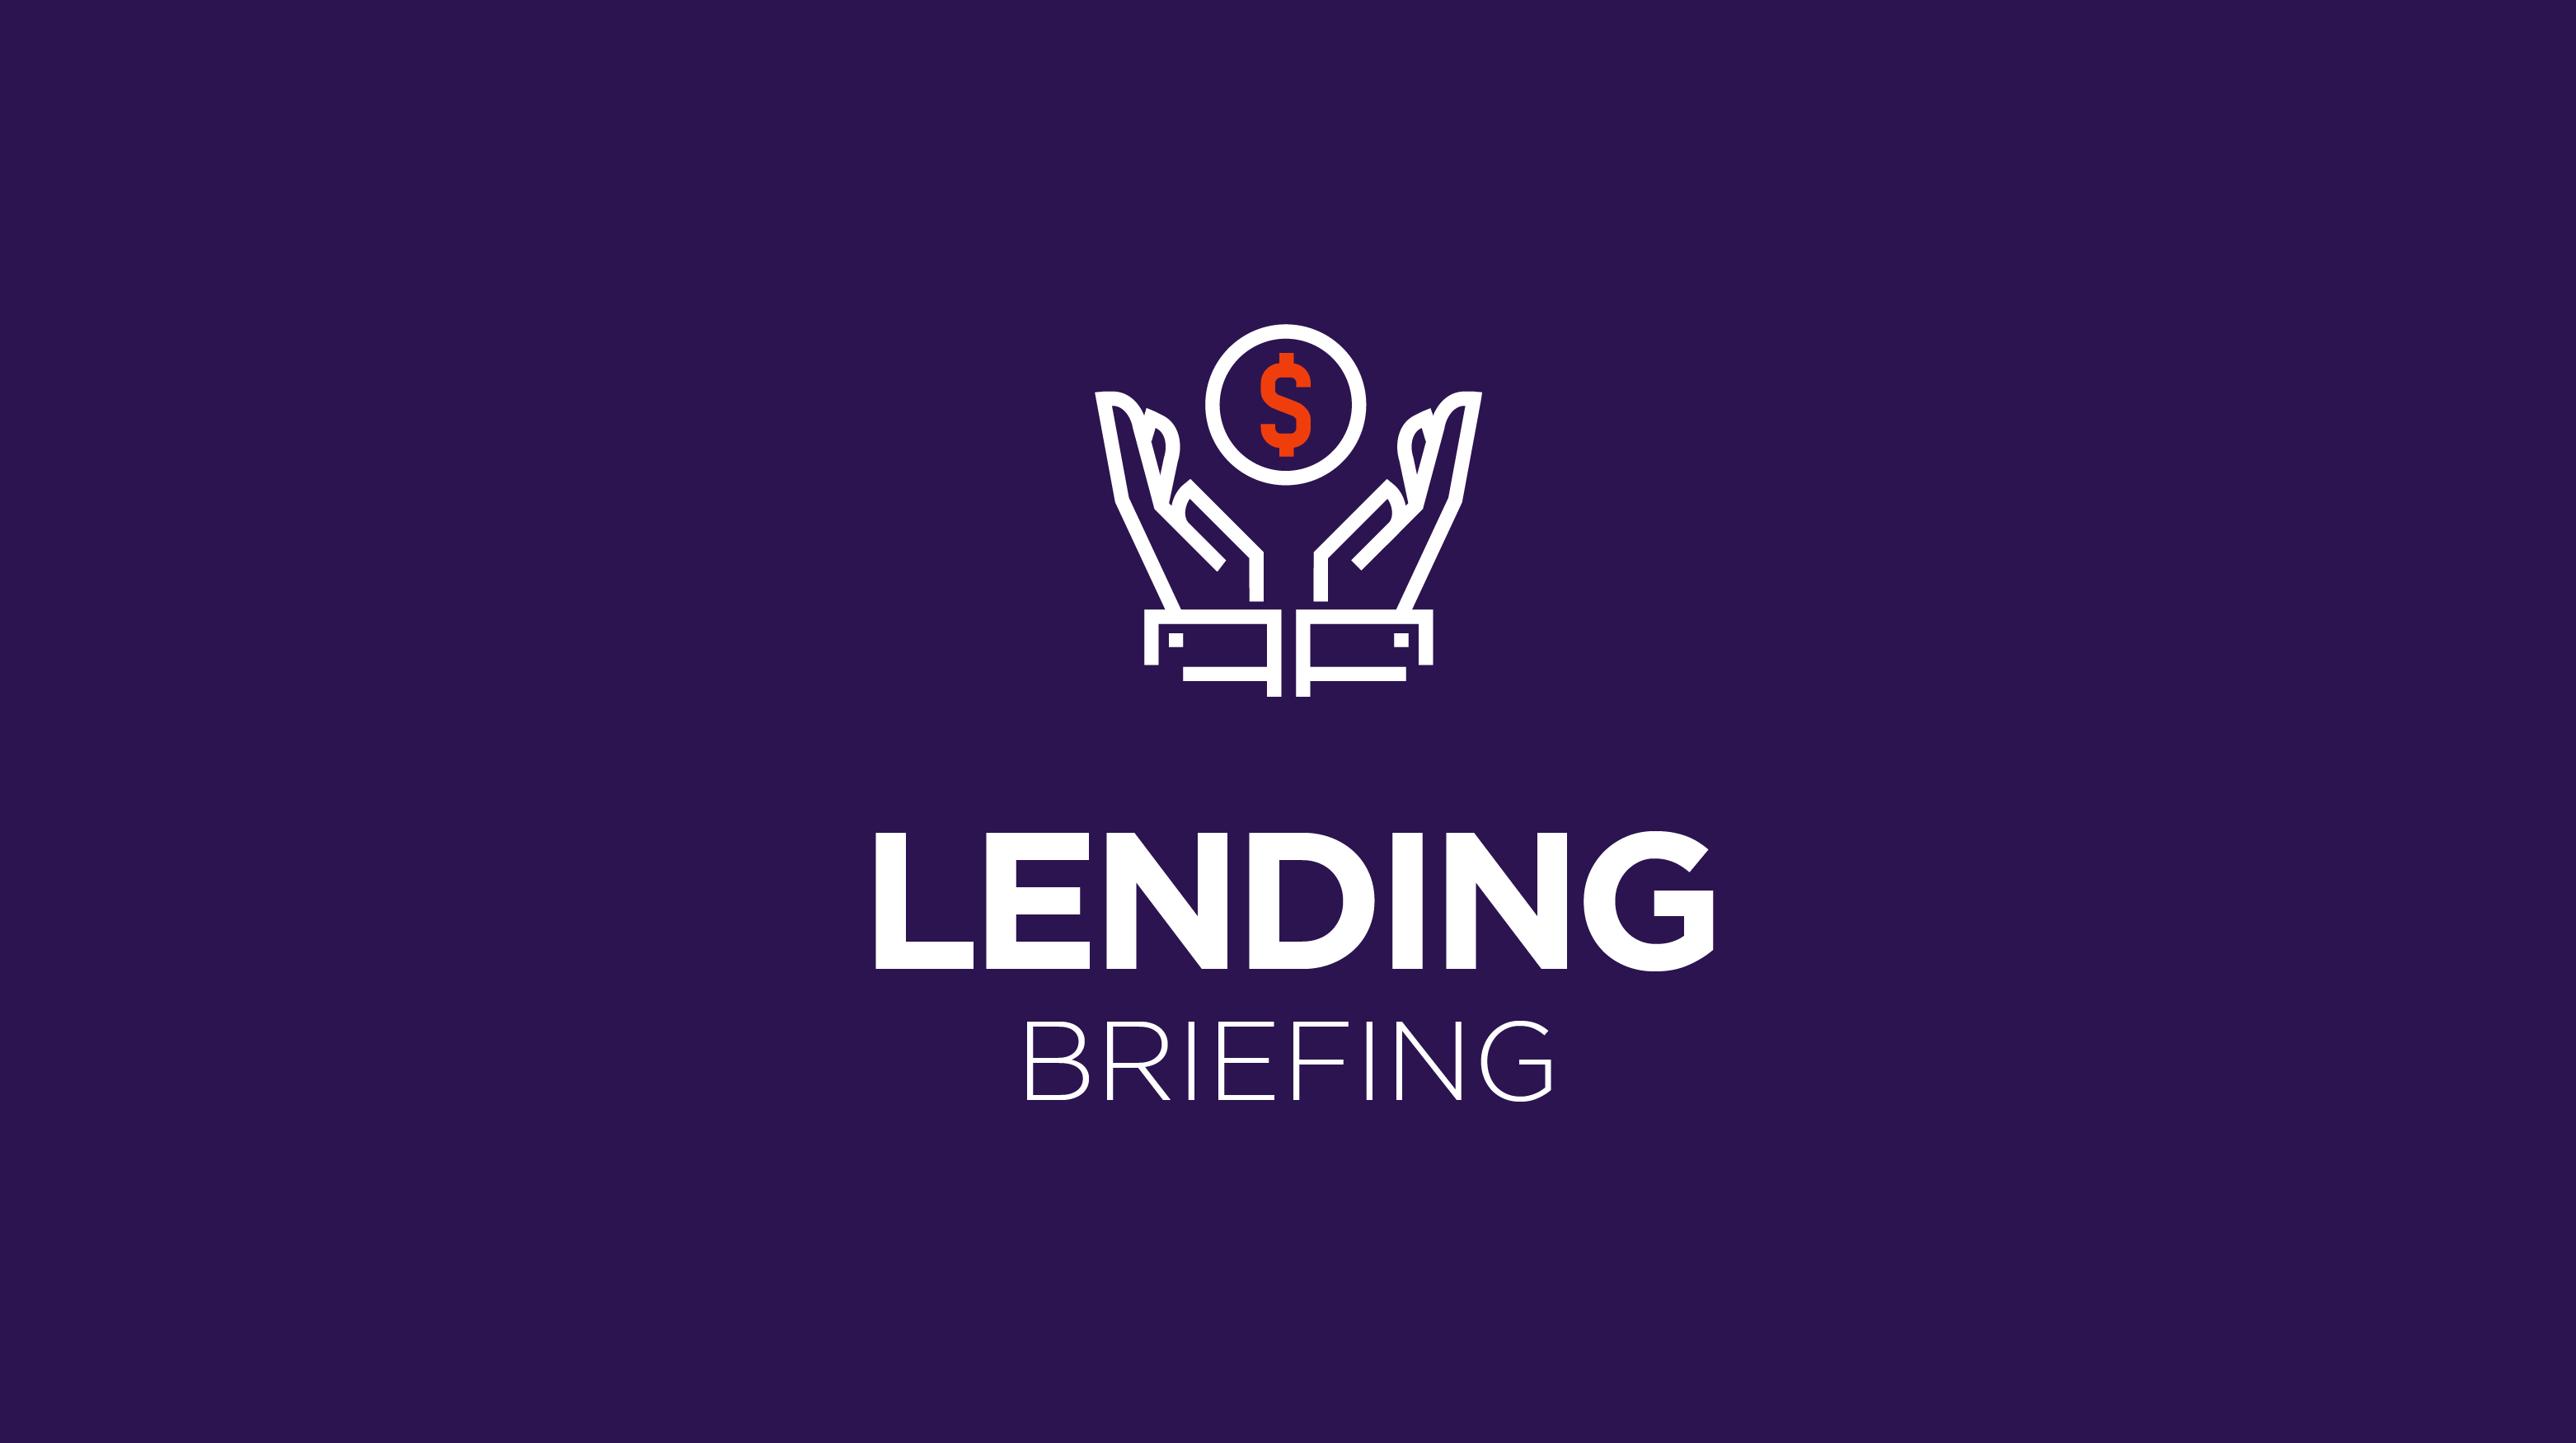 Lending Briefing: Embedded lending with Finastra